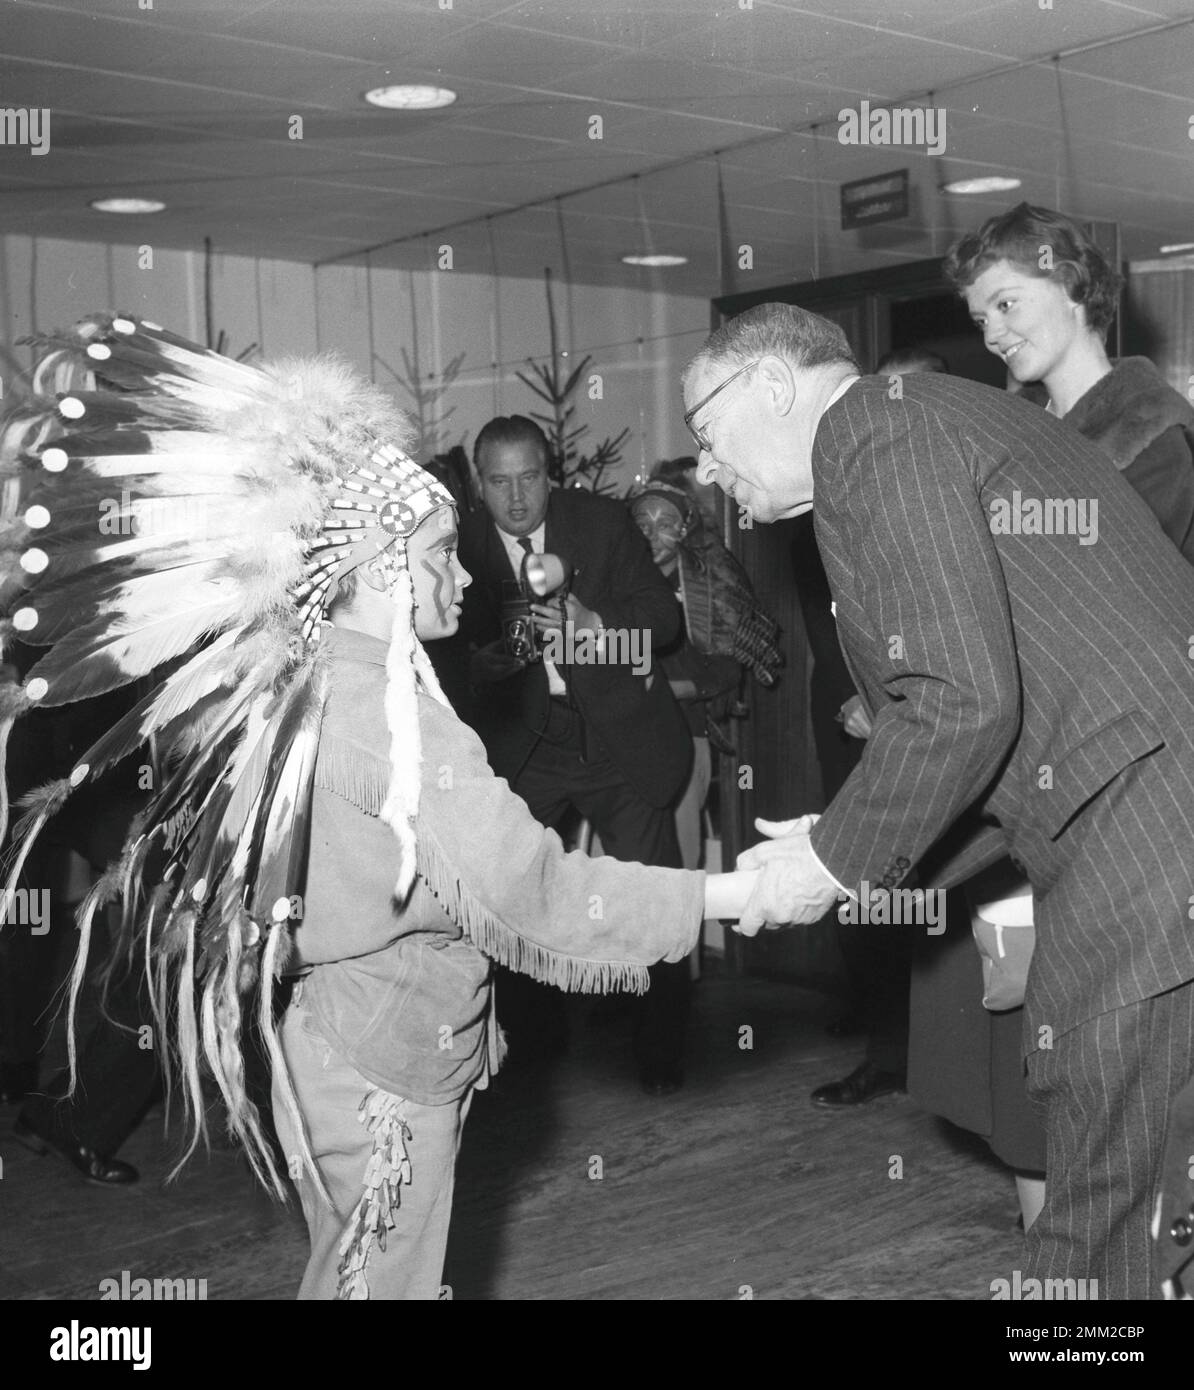 Carl XVI Gustaf, King of Sweden. Born 30 april 1946. Pictured wearing an native american costume at his school Broms 1958 together with his grandfather king Gustaf VI Adolf. ref BV3-12 Stock Photo